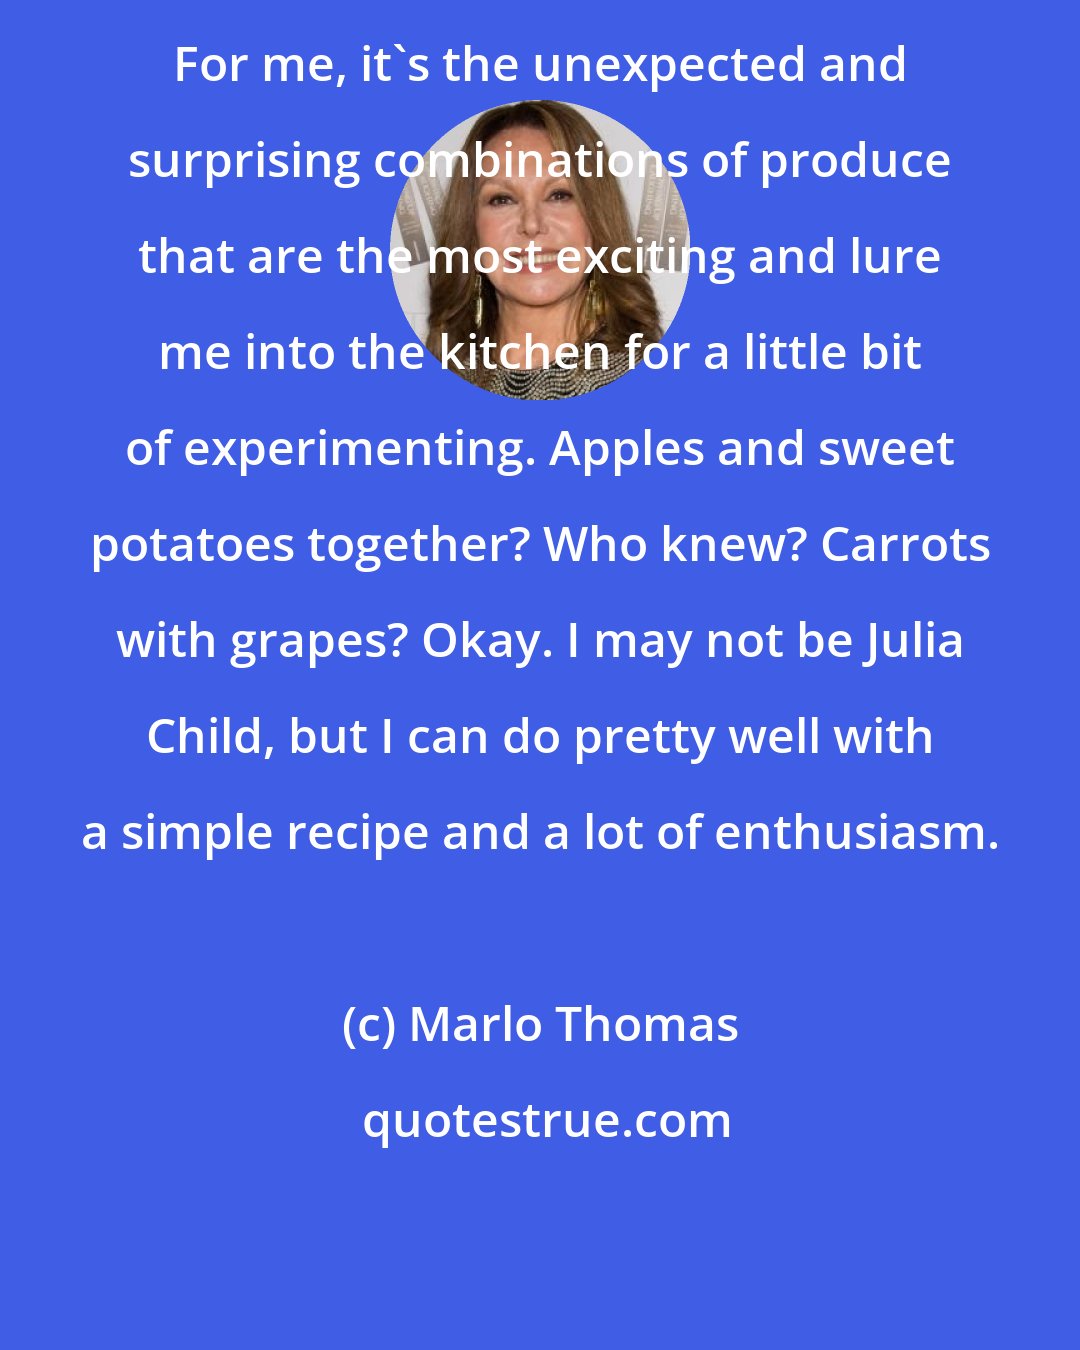 Marlo Thomas: For me, it's the unexpected and surprising combinations of produce that are the most exciting and lure me into the kitchen for a little bit of experimenting. Apples and sweet potatoes together? Who knew? Carrots with grapes? Okay. I may not be Julia Child, but I can do pretty well with a simple recipe and a lot of enthusiasm.